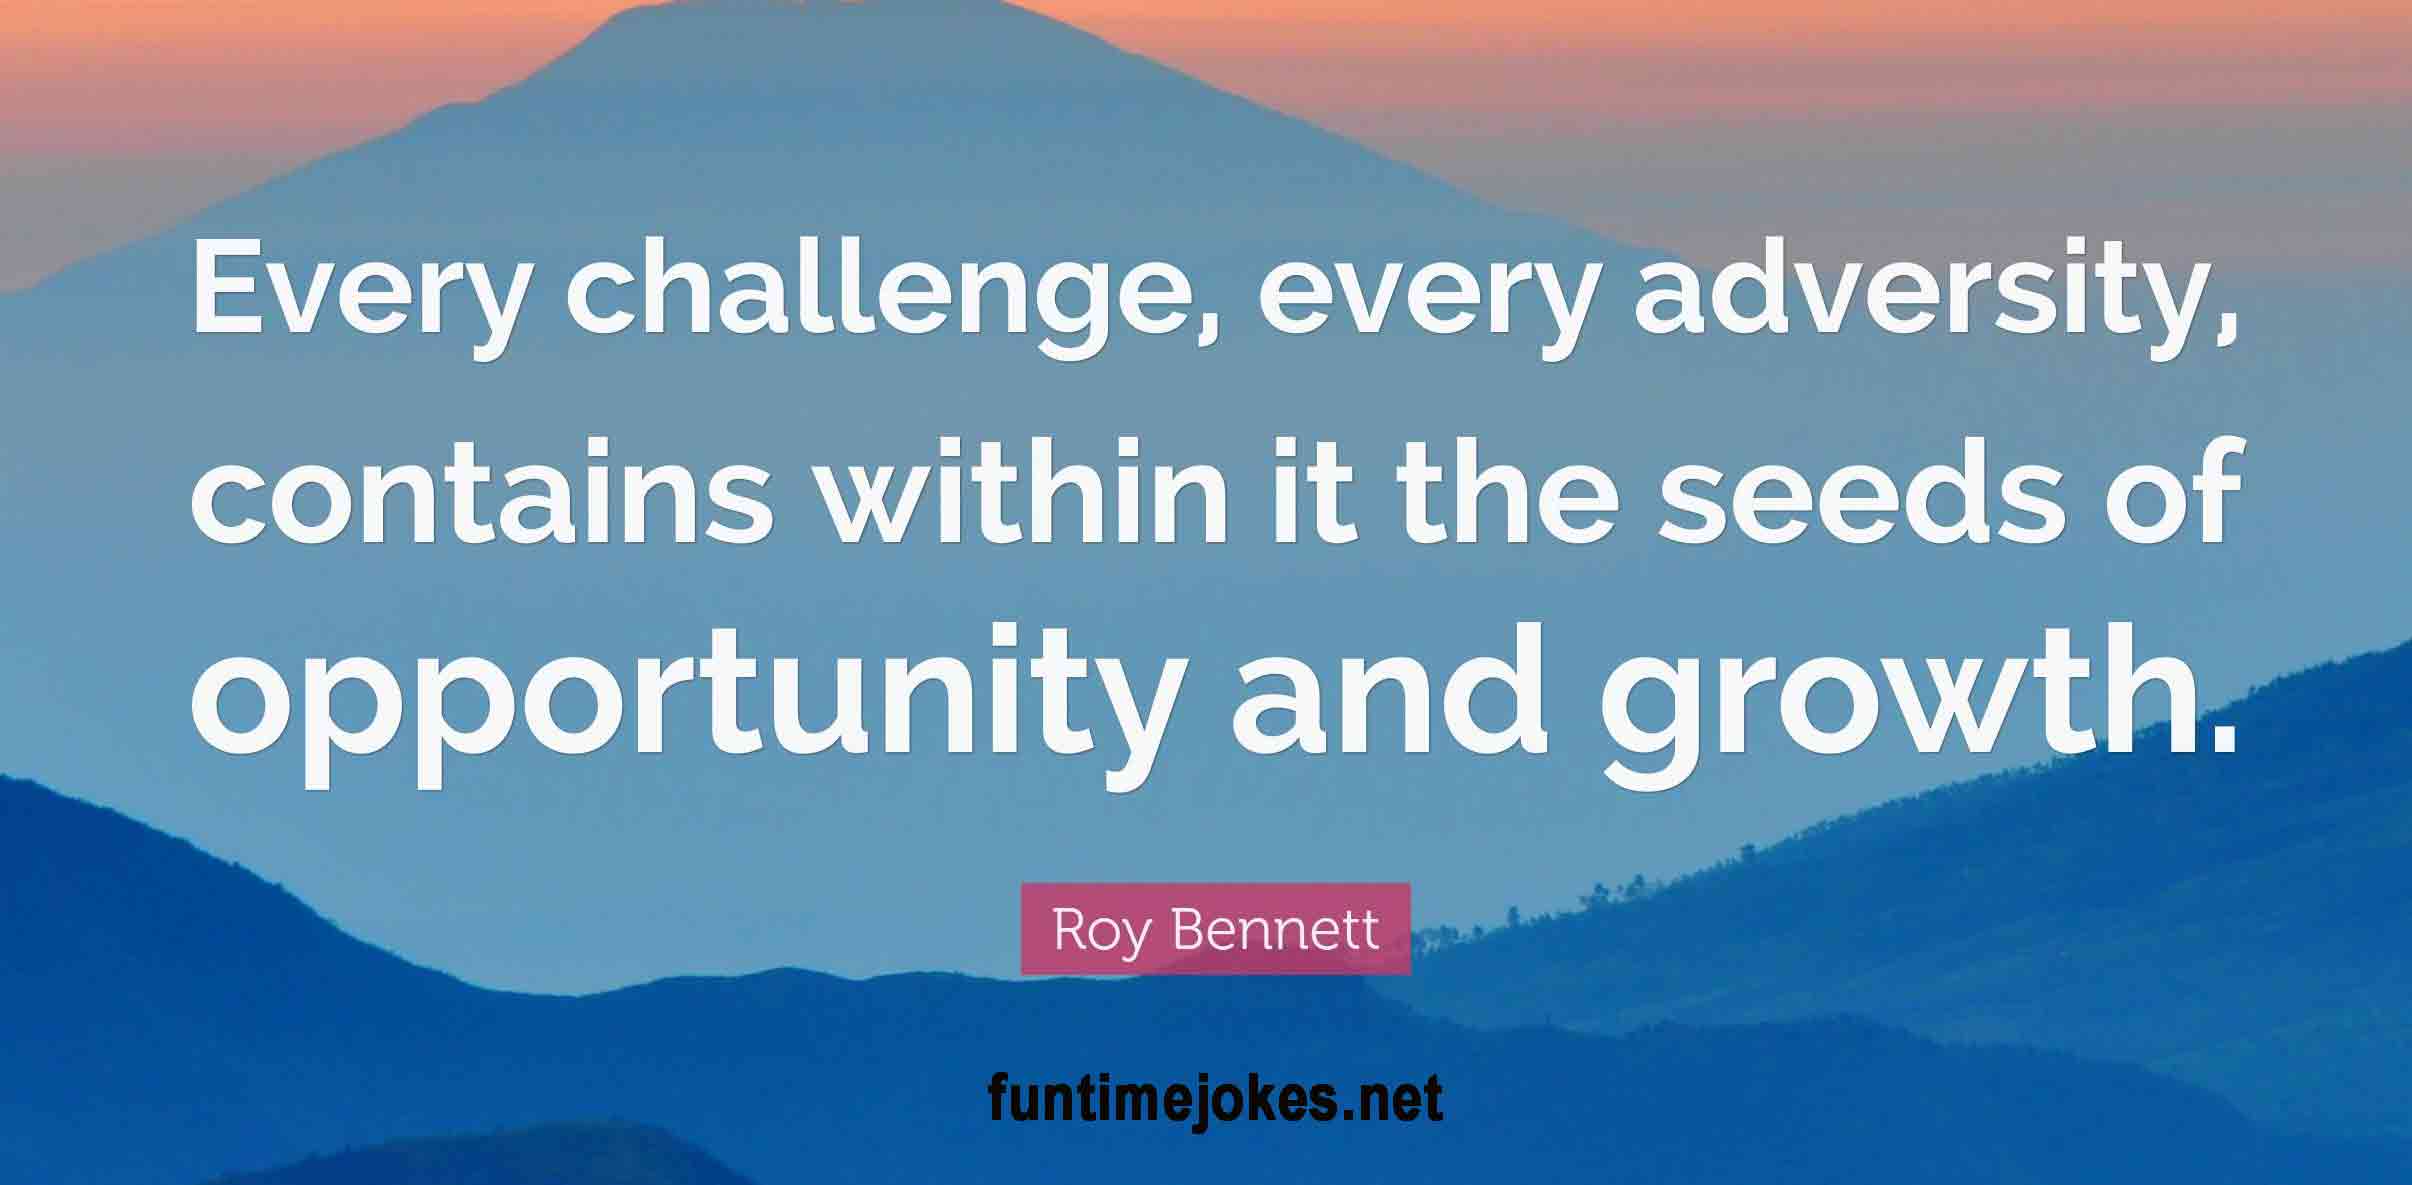 Inspirational Quotes:-“Every challenge, every adversity, contains within it the seeds of opportunity and growth.” ― Roy Bennett